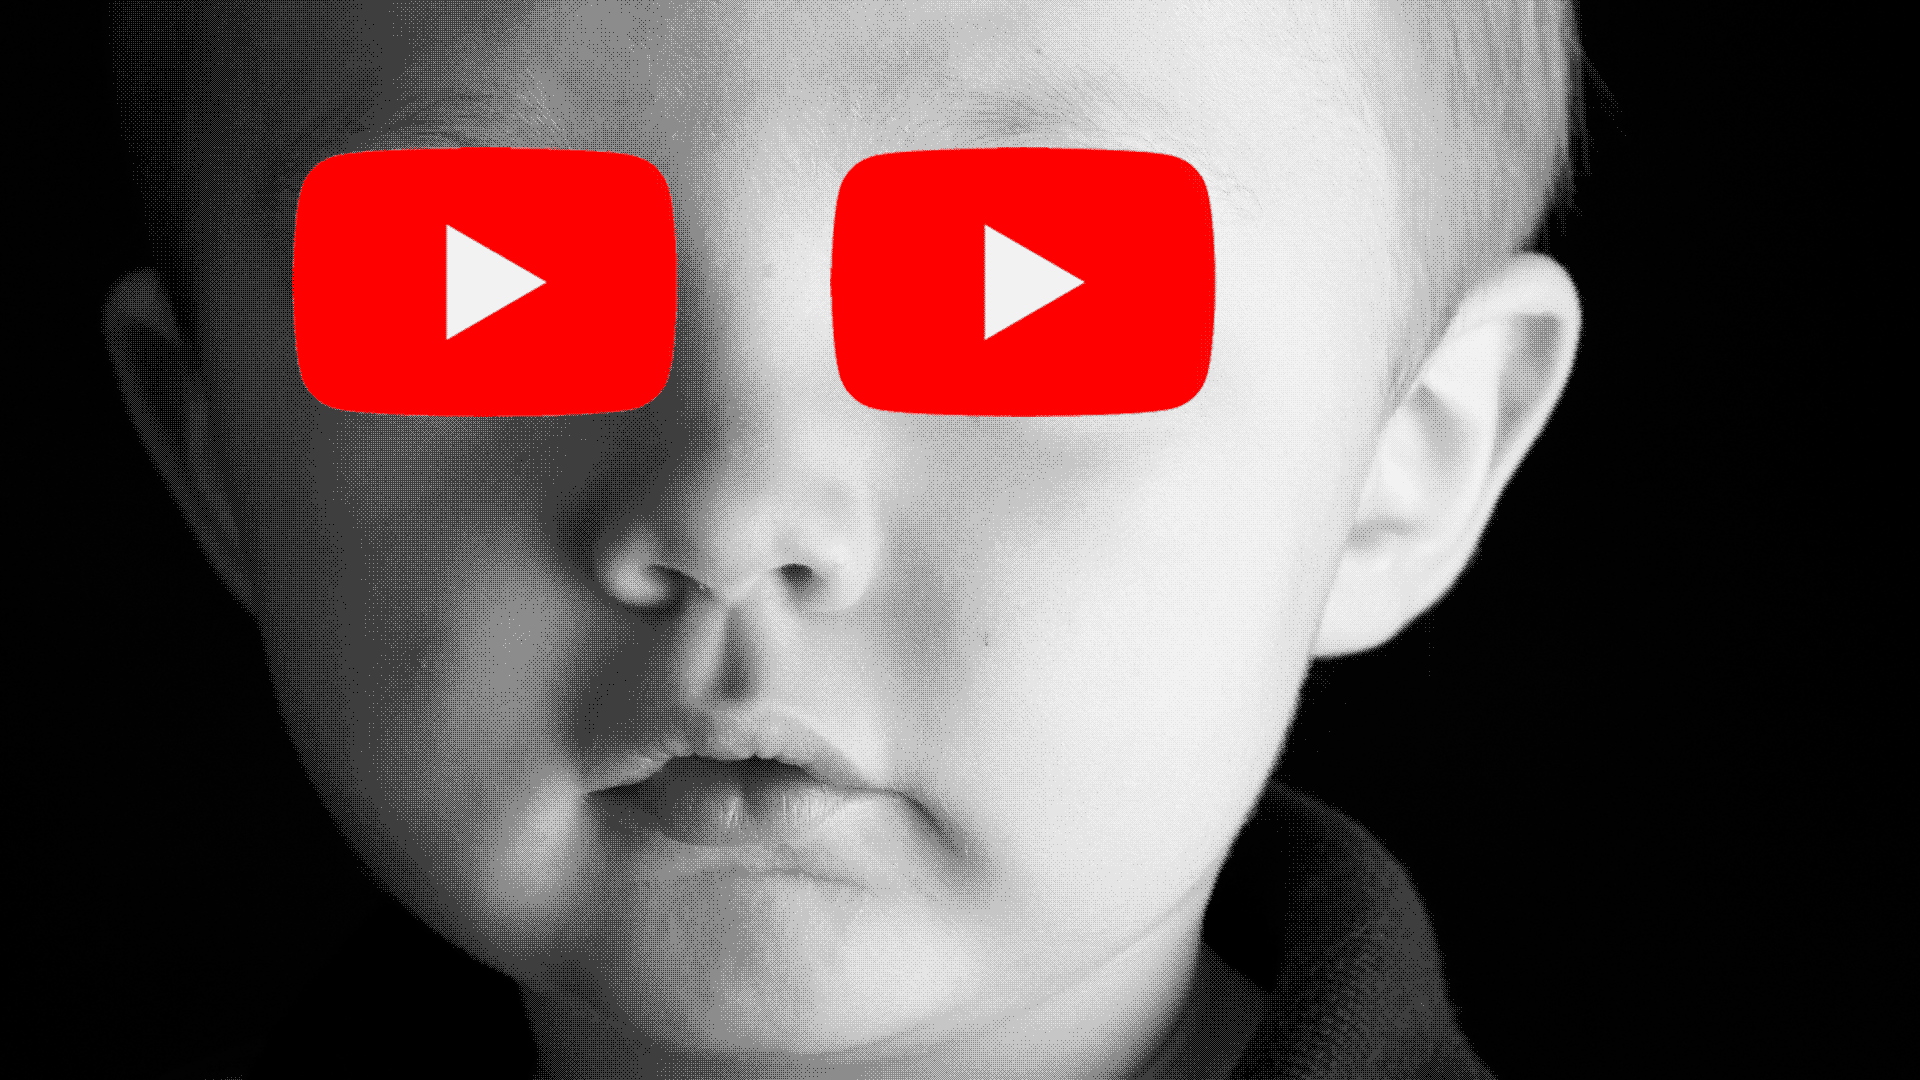 Illustration of a toddler's face with rotating YouTube "play" buttons for eyes